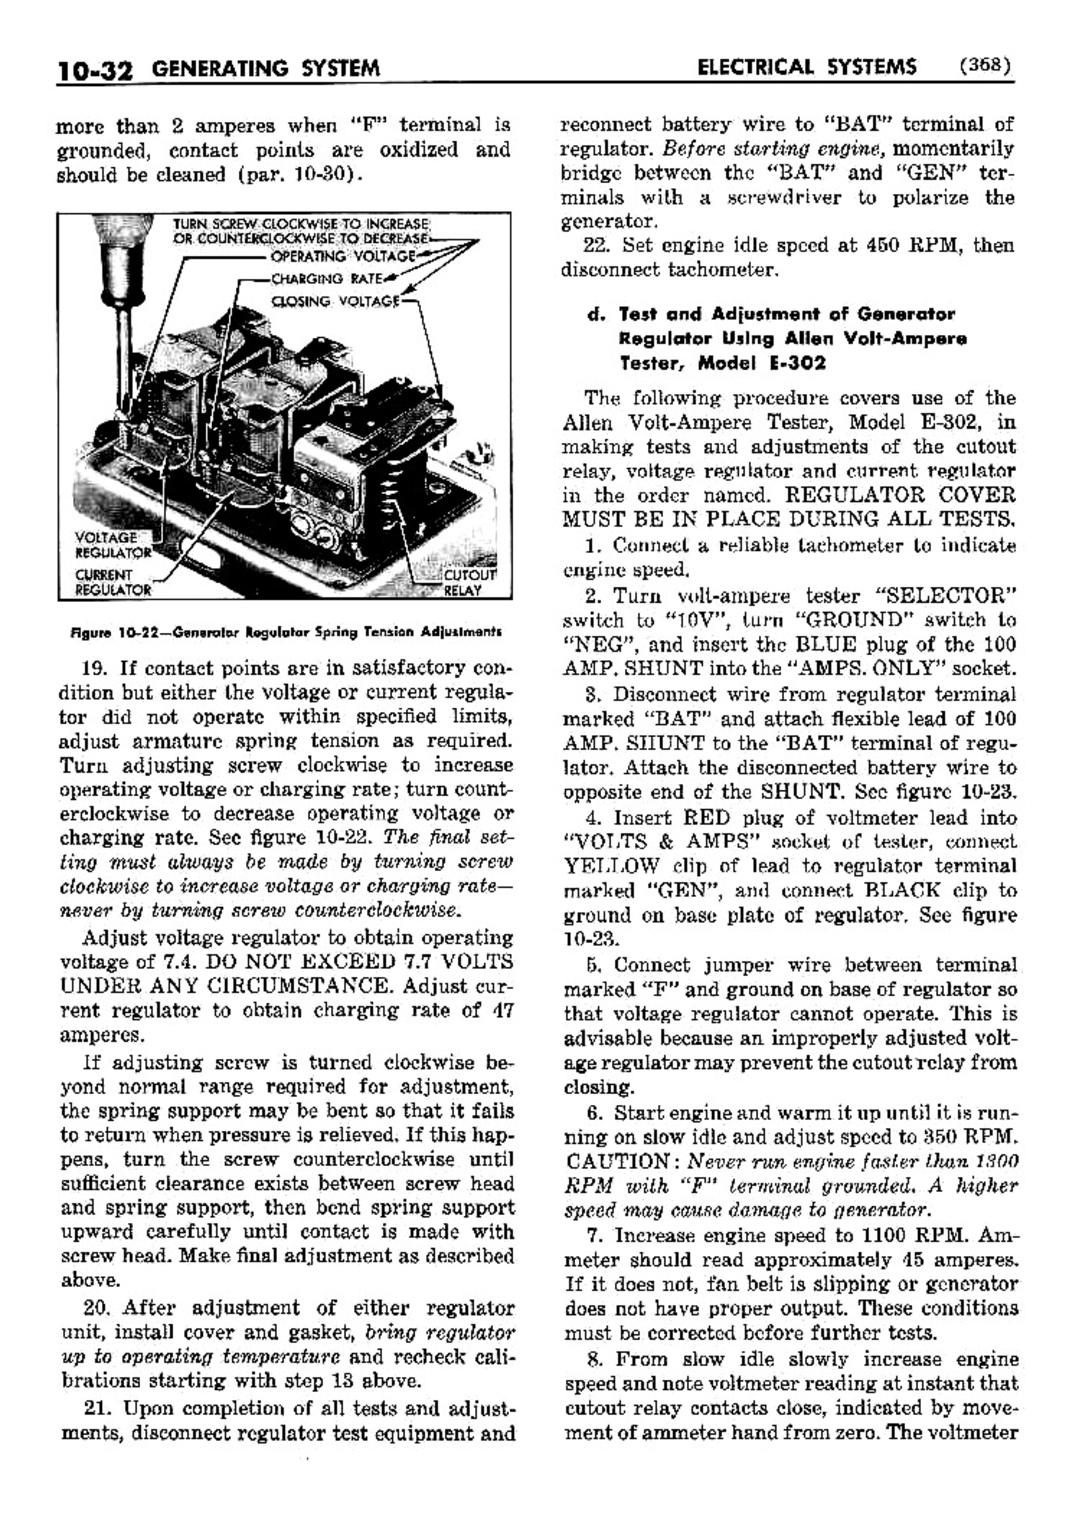 n_11 1952 Buick Shop Manual - Electrical Systems-032-032.jpg